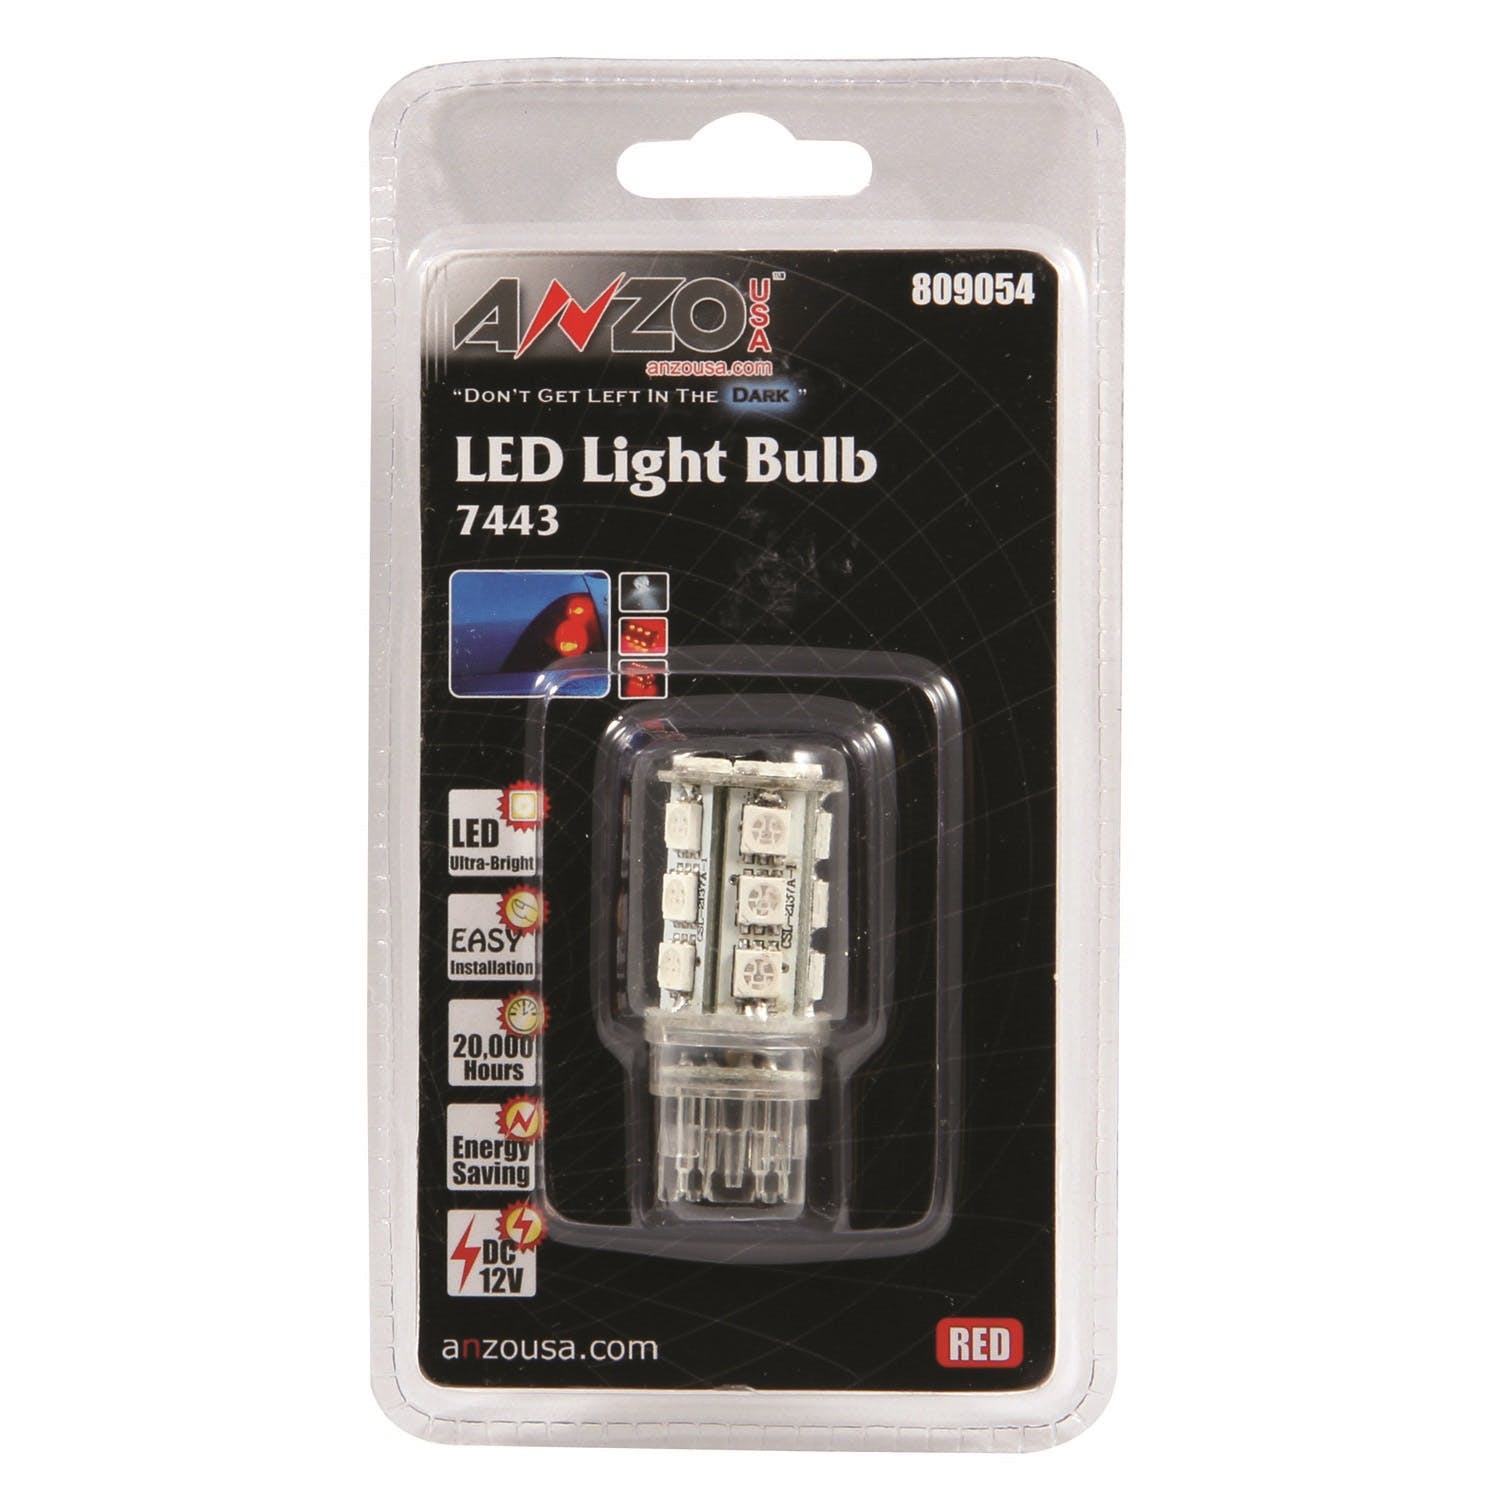 AnzoUSA 809054 7443 Red - 18 LED's 1 3/4" Tall